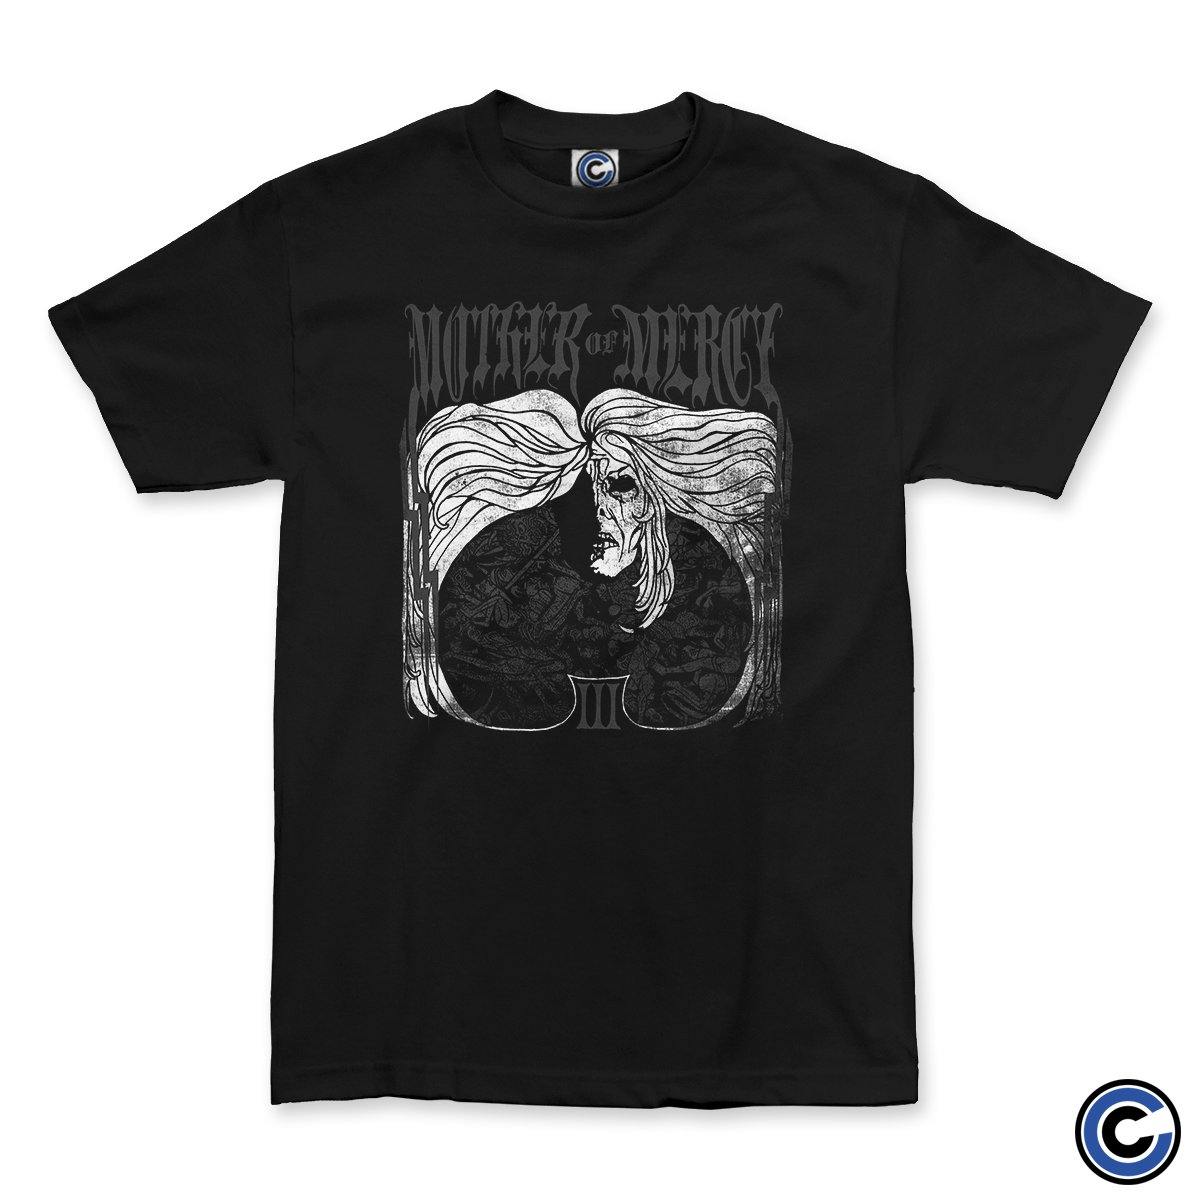 Buy – Mother of Mercy "III" Shirt – Band & Music Merch – Cold Cuts Merch